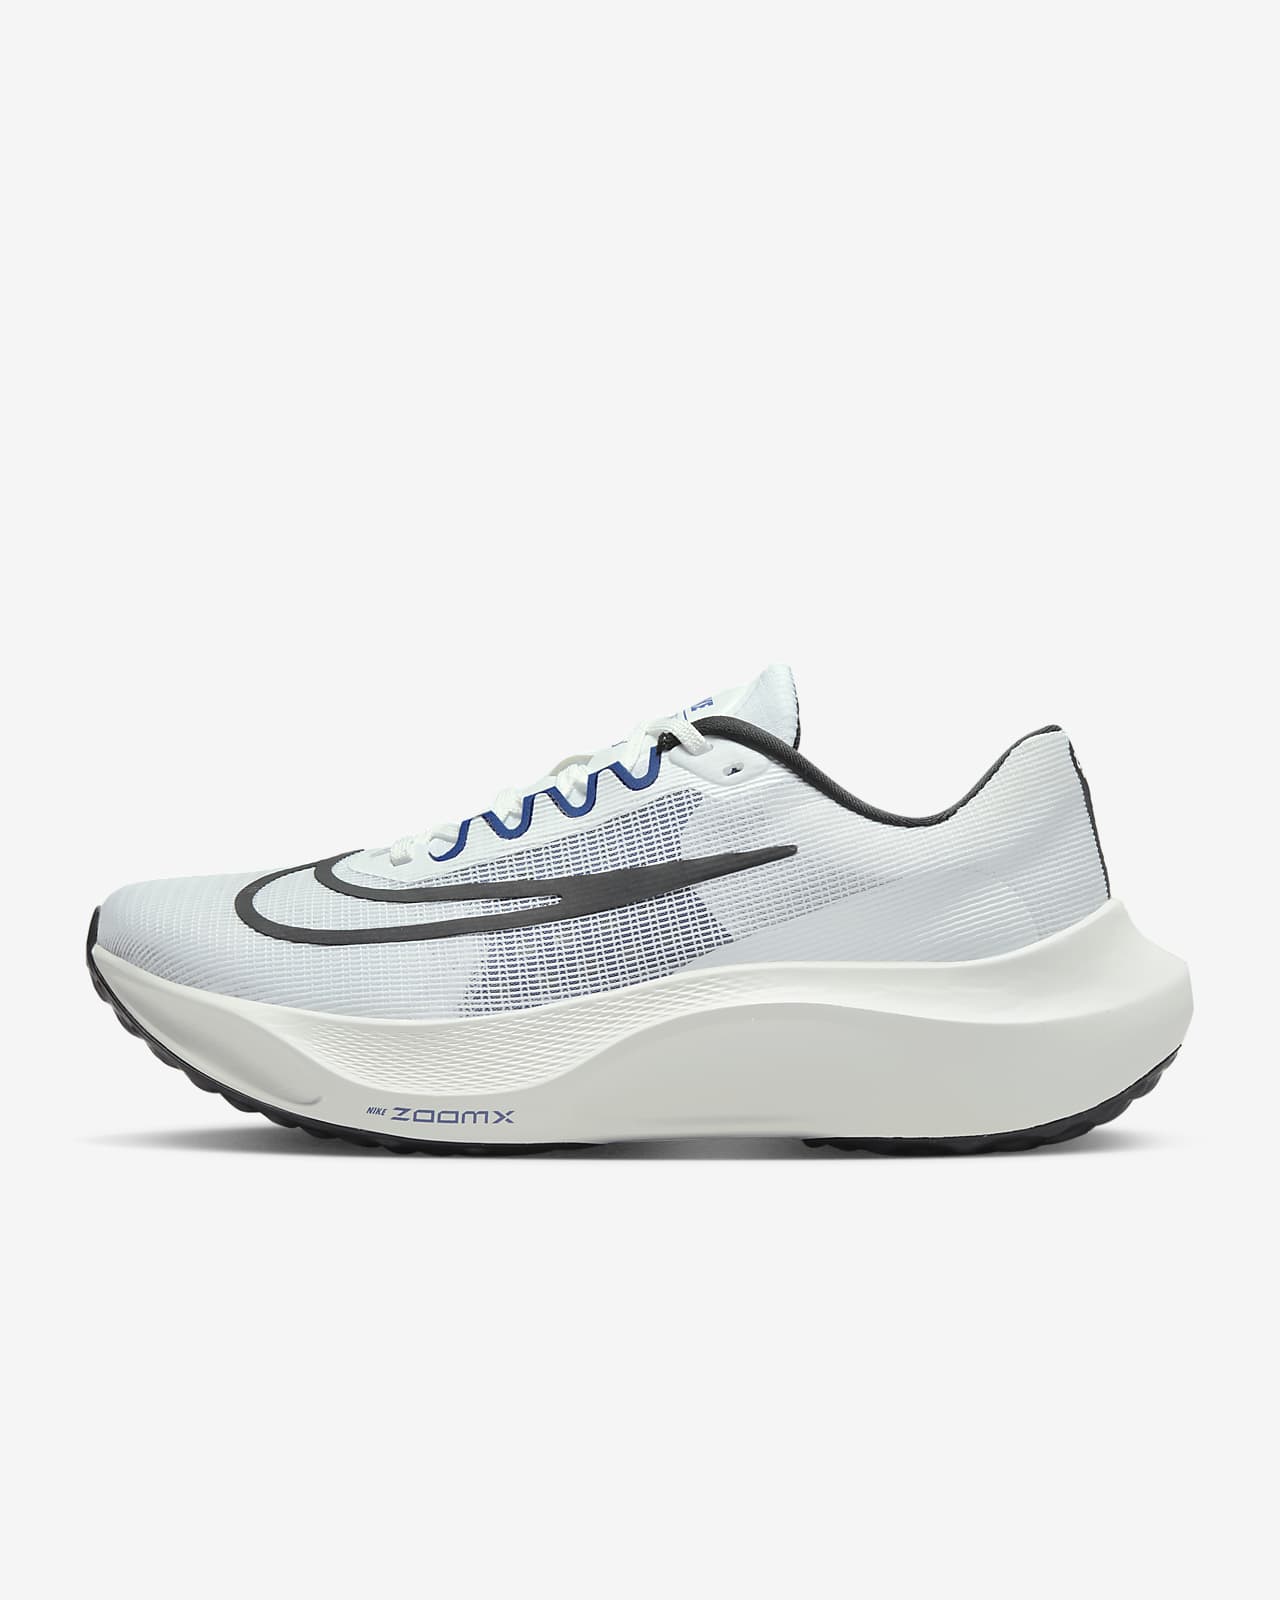 nike zoom fly 4 men's road running shoes